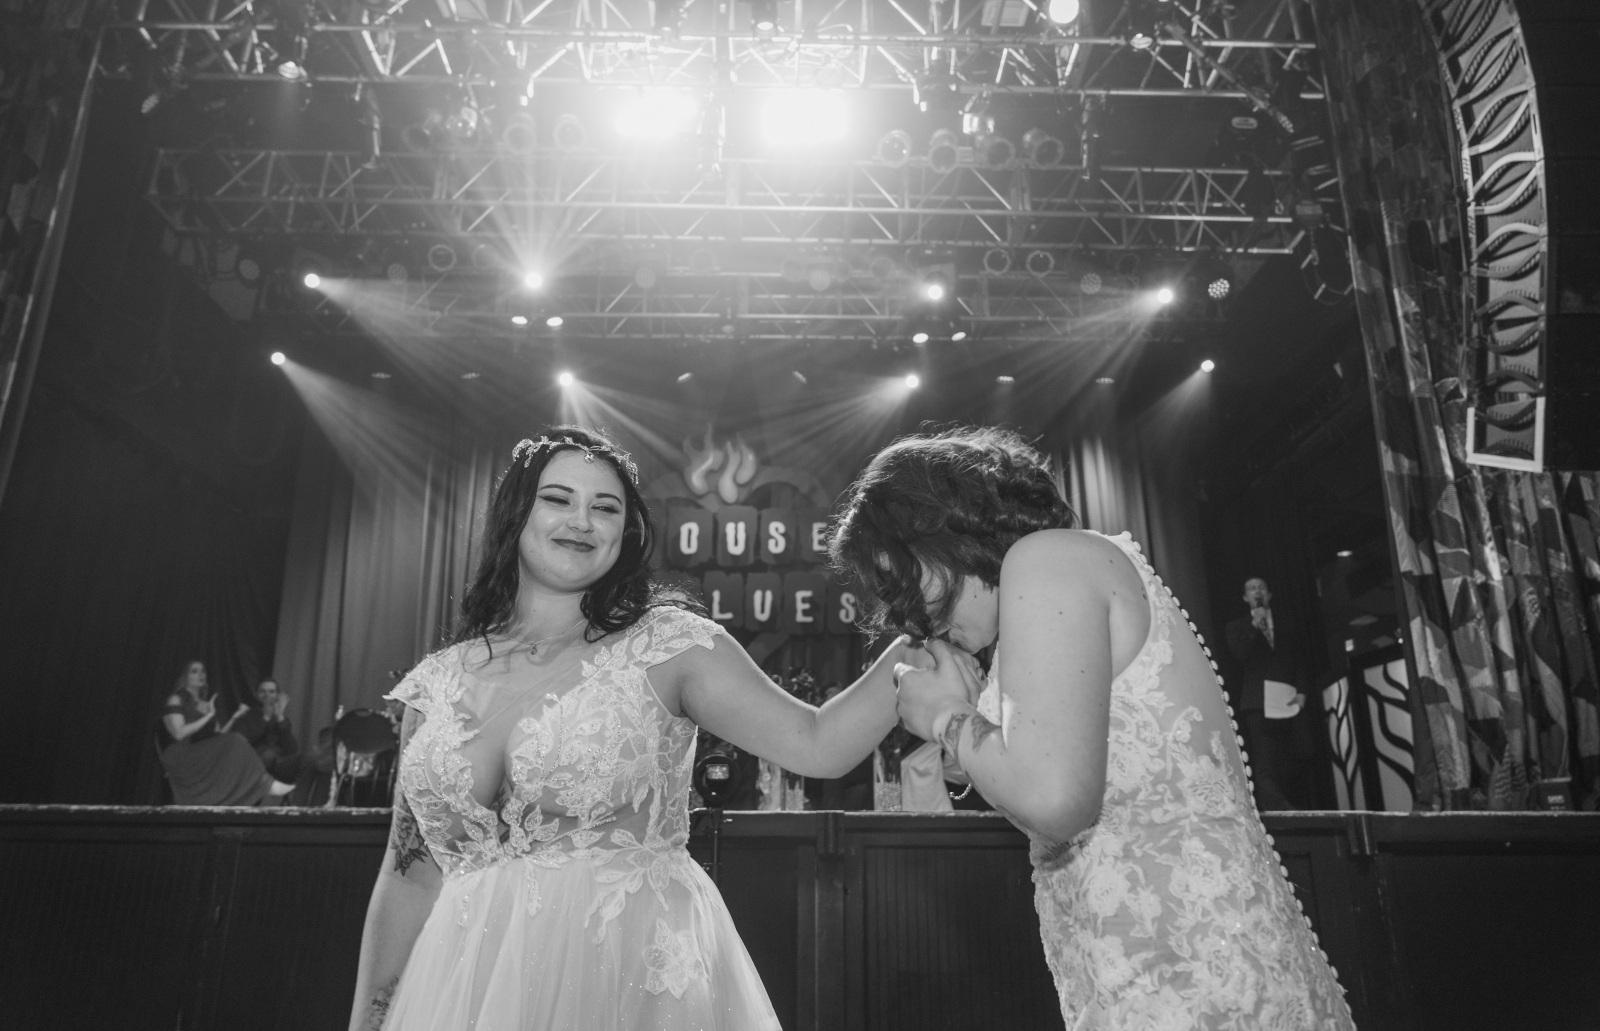 Two brides first dance, kiss, smile, black and white, beautiful, classic, two wedding dresses, love is love, beautiful lesbian wedding at the House of Blues